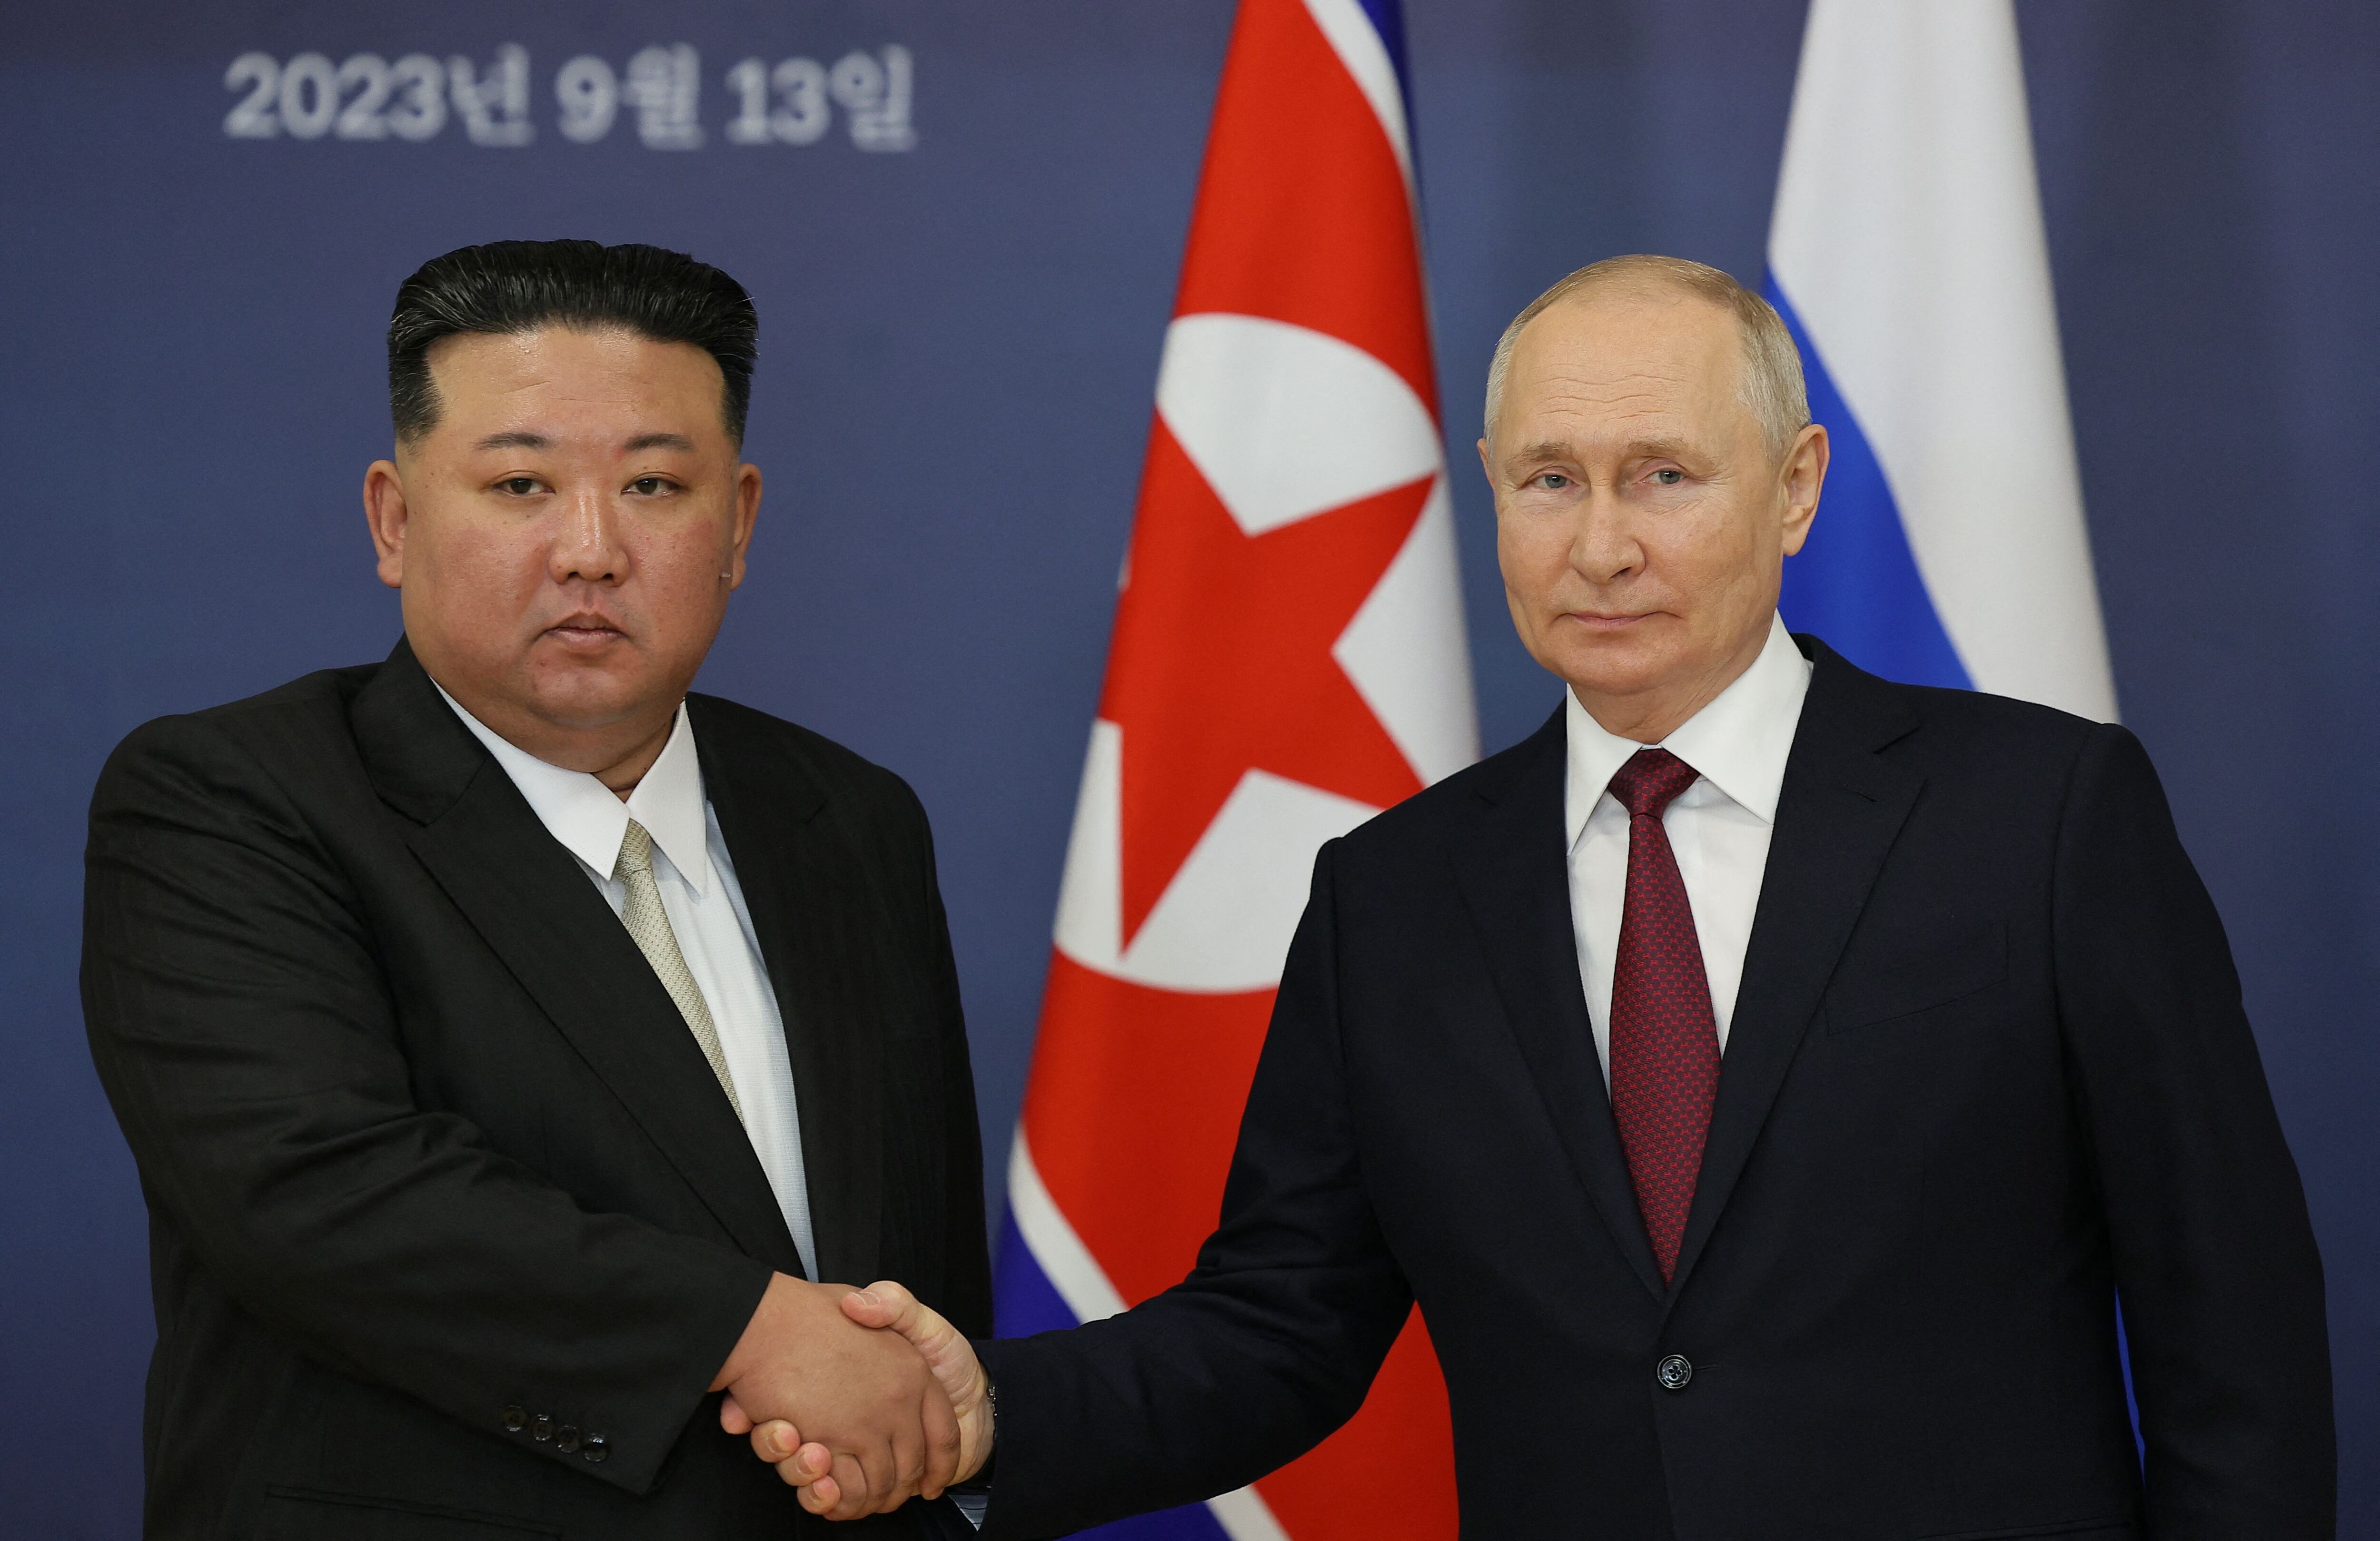 Russian President Vladimir Putin (right) and North Korean leader Kim Jong Un shake hands during a meeting at the Vostochny cosmodrome, in the Amur region, on September 13, 2023. (Photo by Vladimir SMIRNOV / AFP).